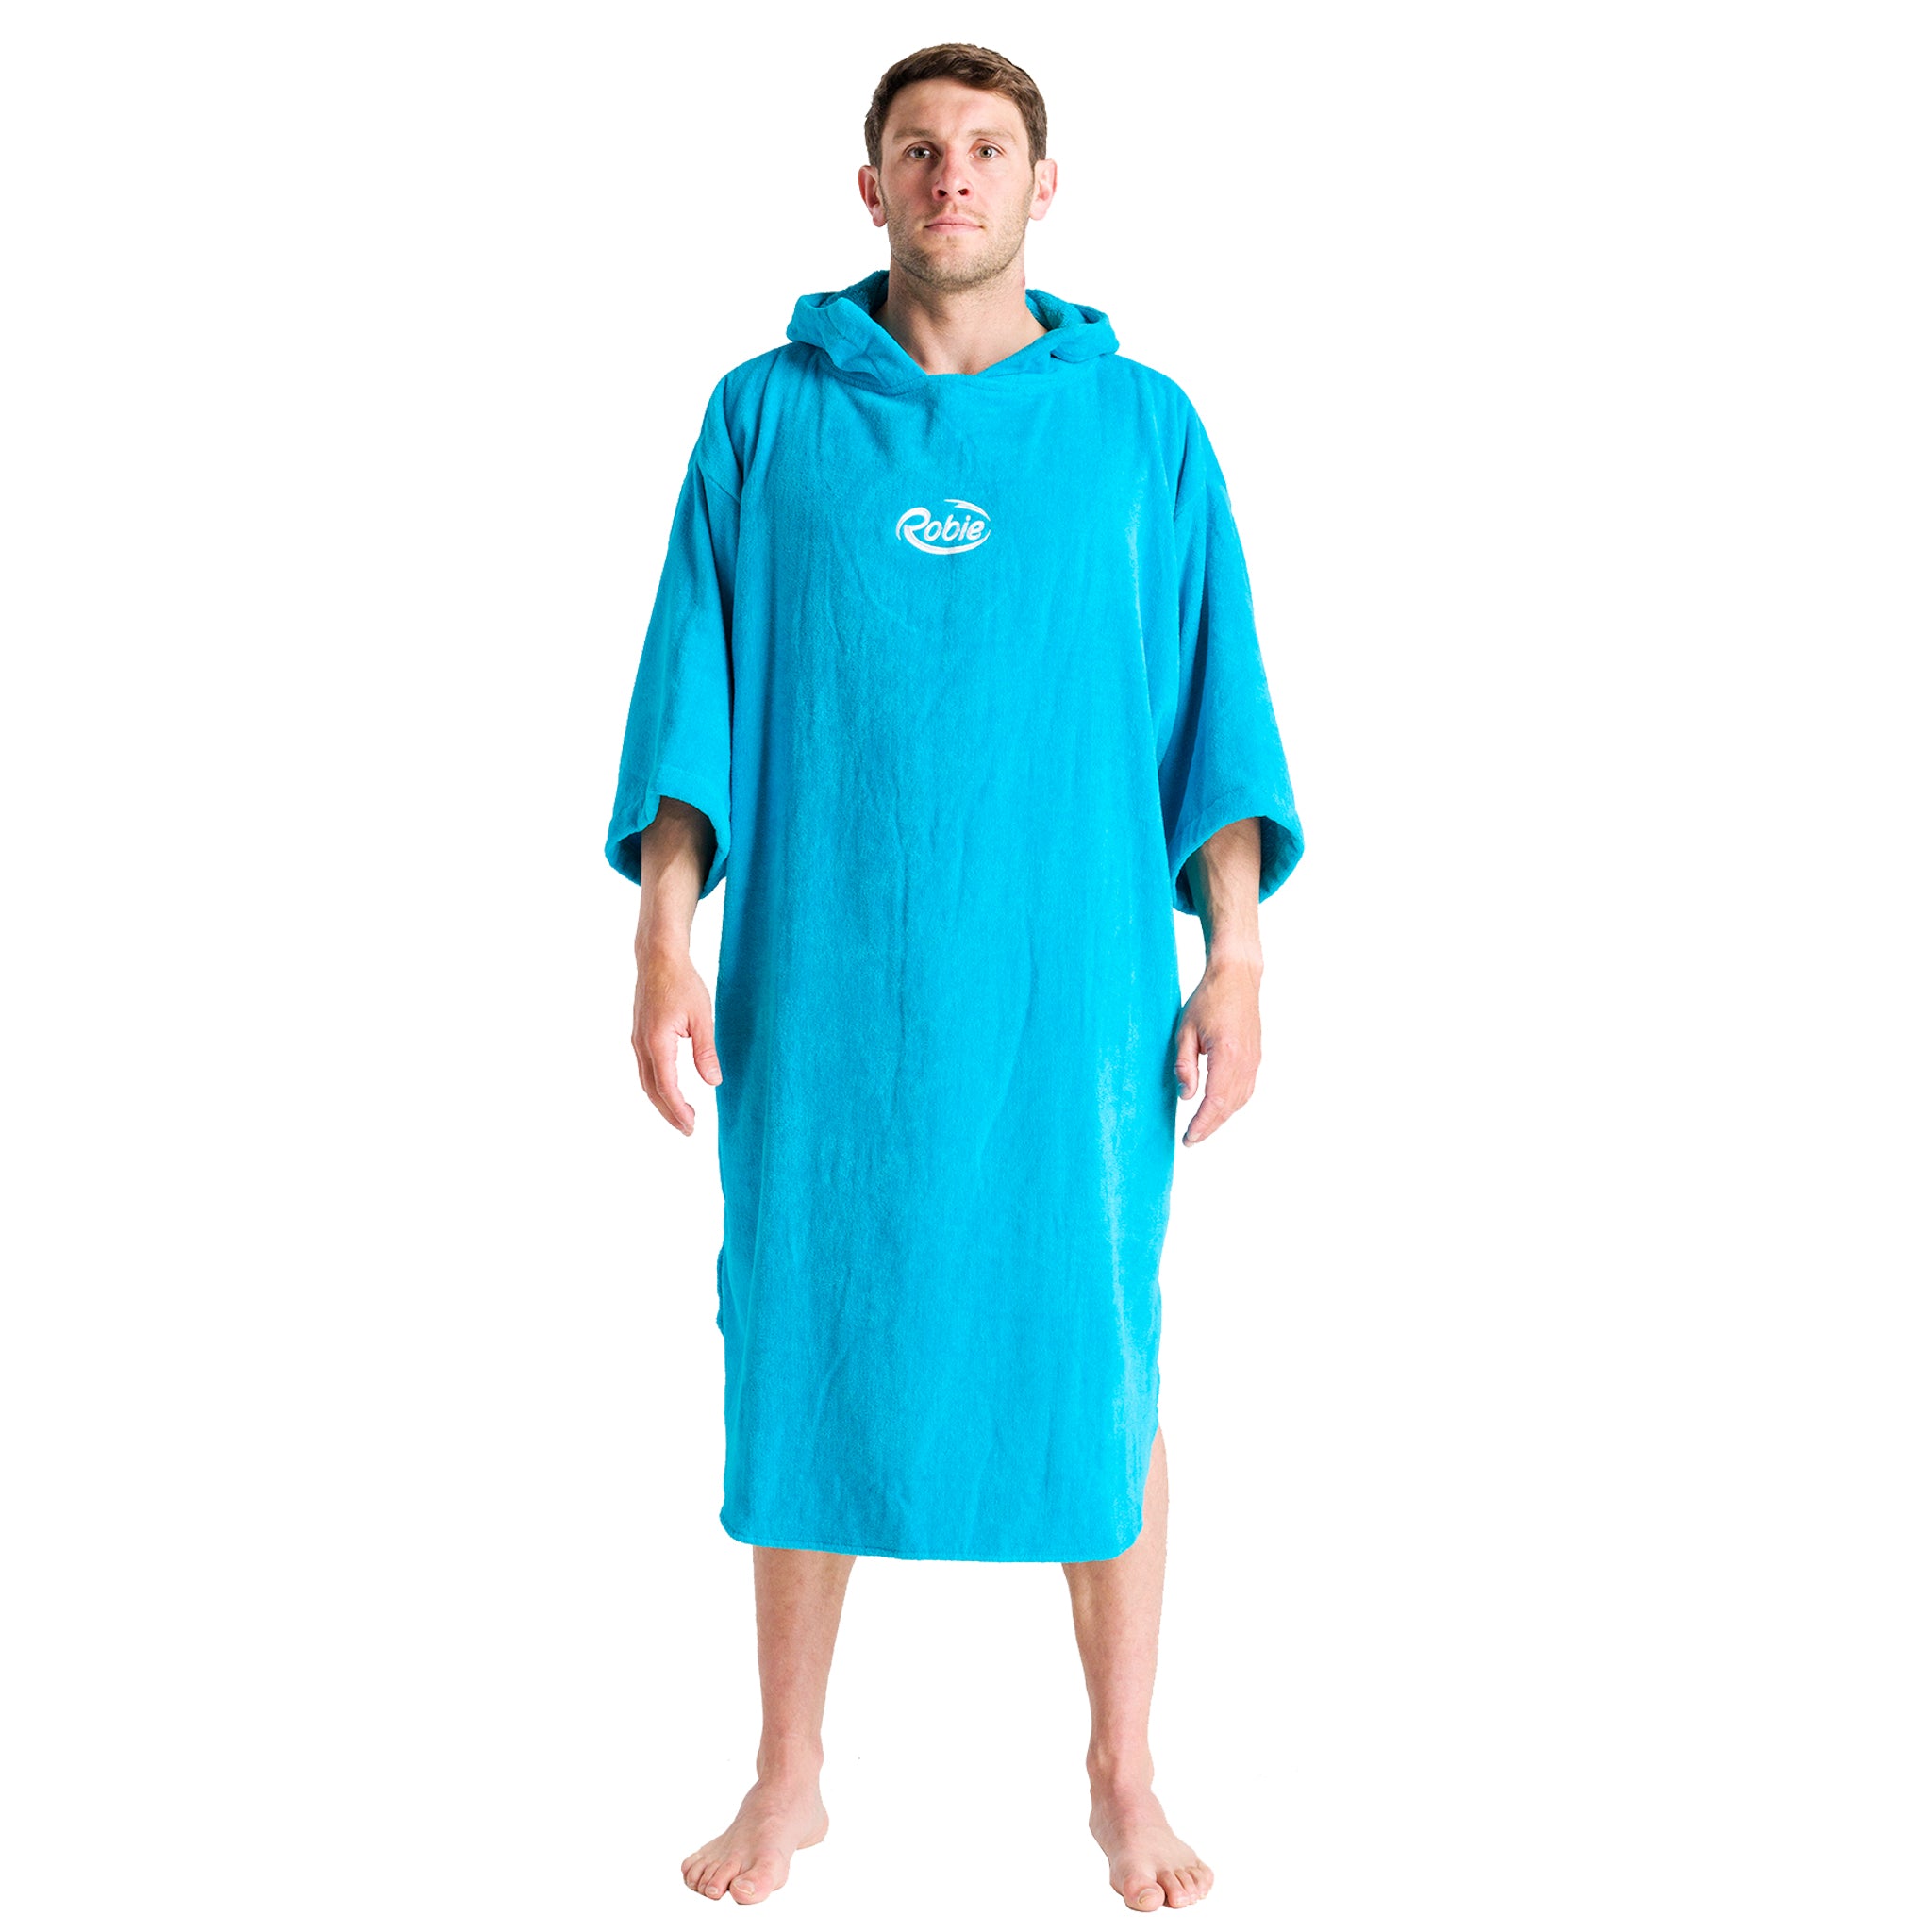 Robie Robes Adult Original Long Sleeve Towelling Beach Changing Poncho - Blue Atoll | Medium